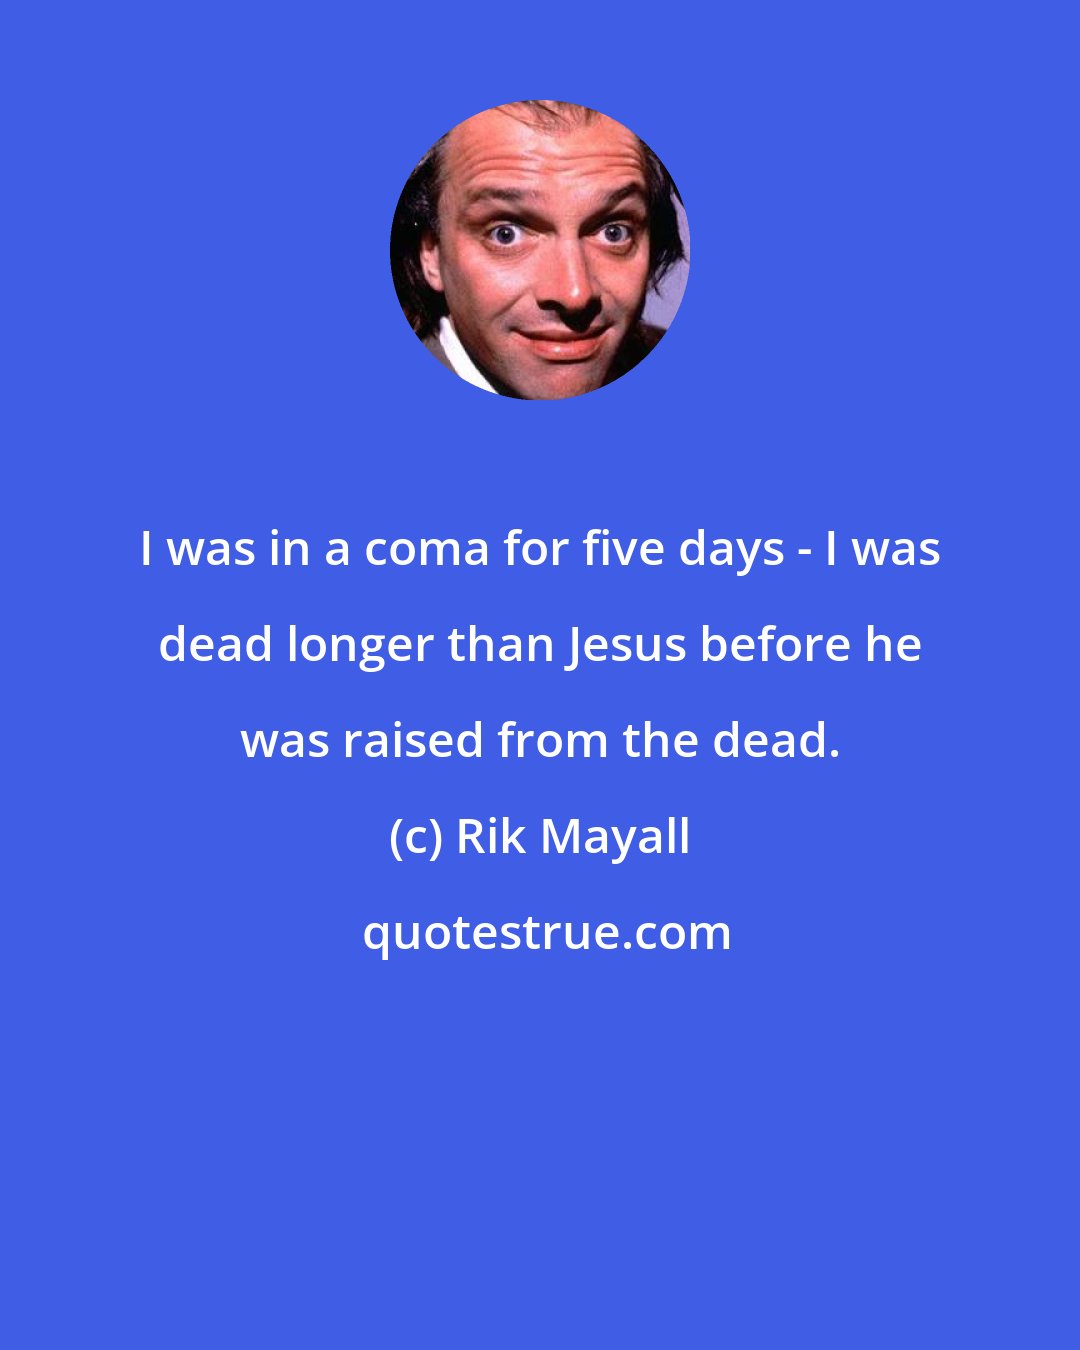 Rik Mayall: I was in a coma for five days - I was dead longer than Jesus before he was raised from the dead.